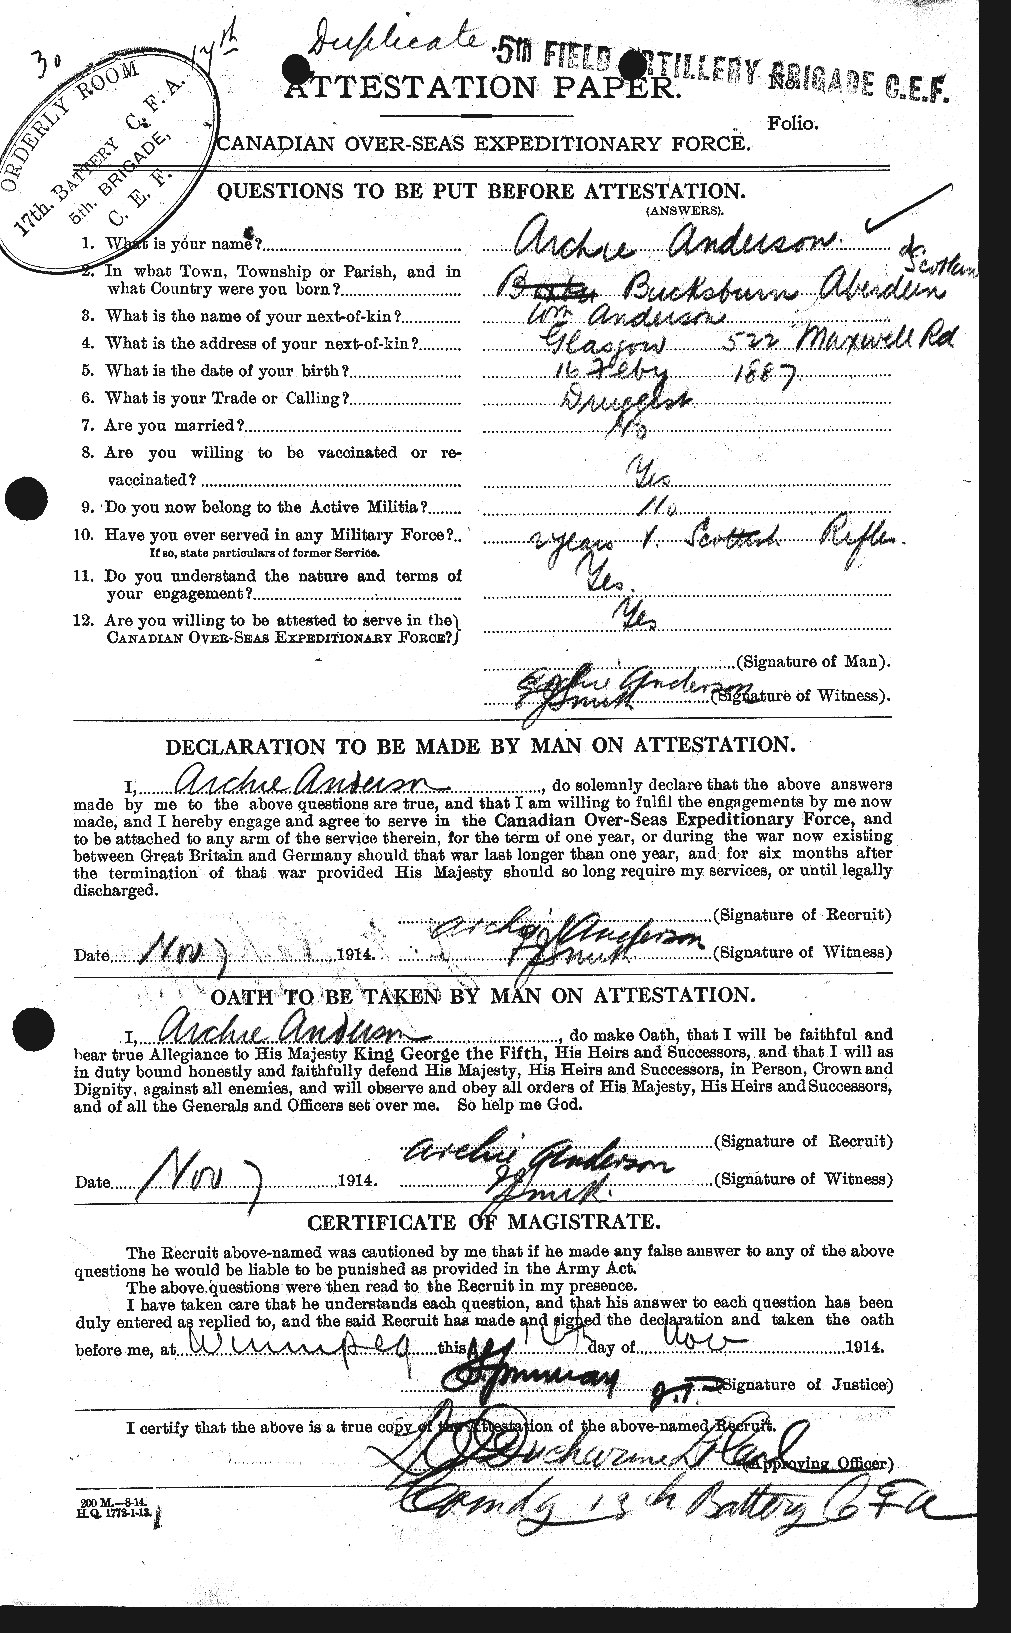 Personnel Records of the First World War - CEF 209339a